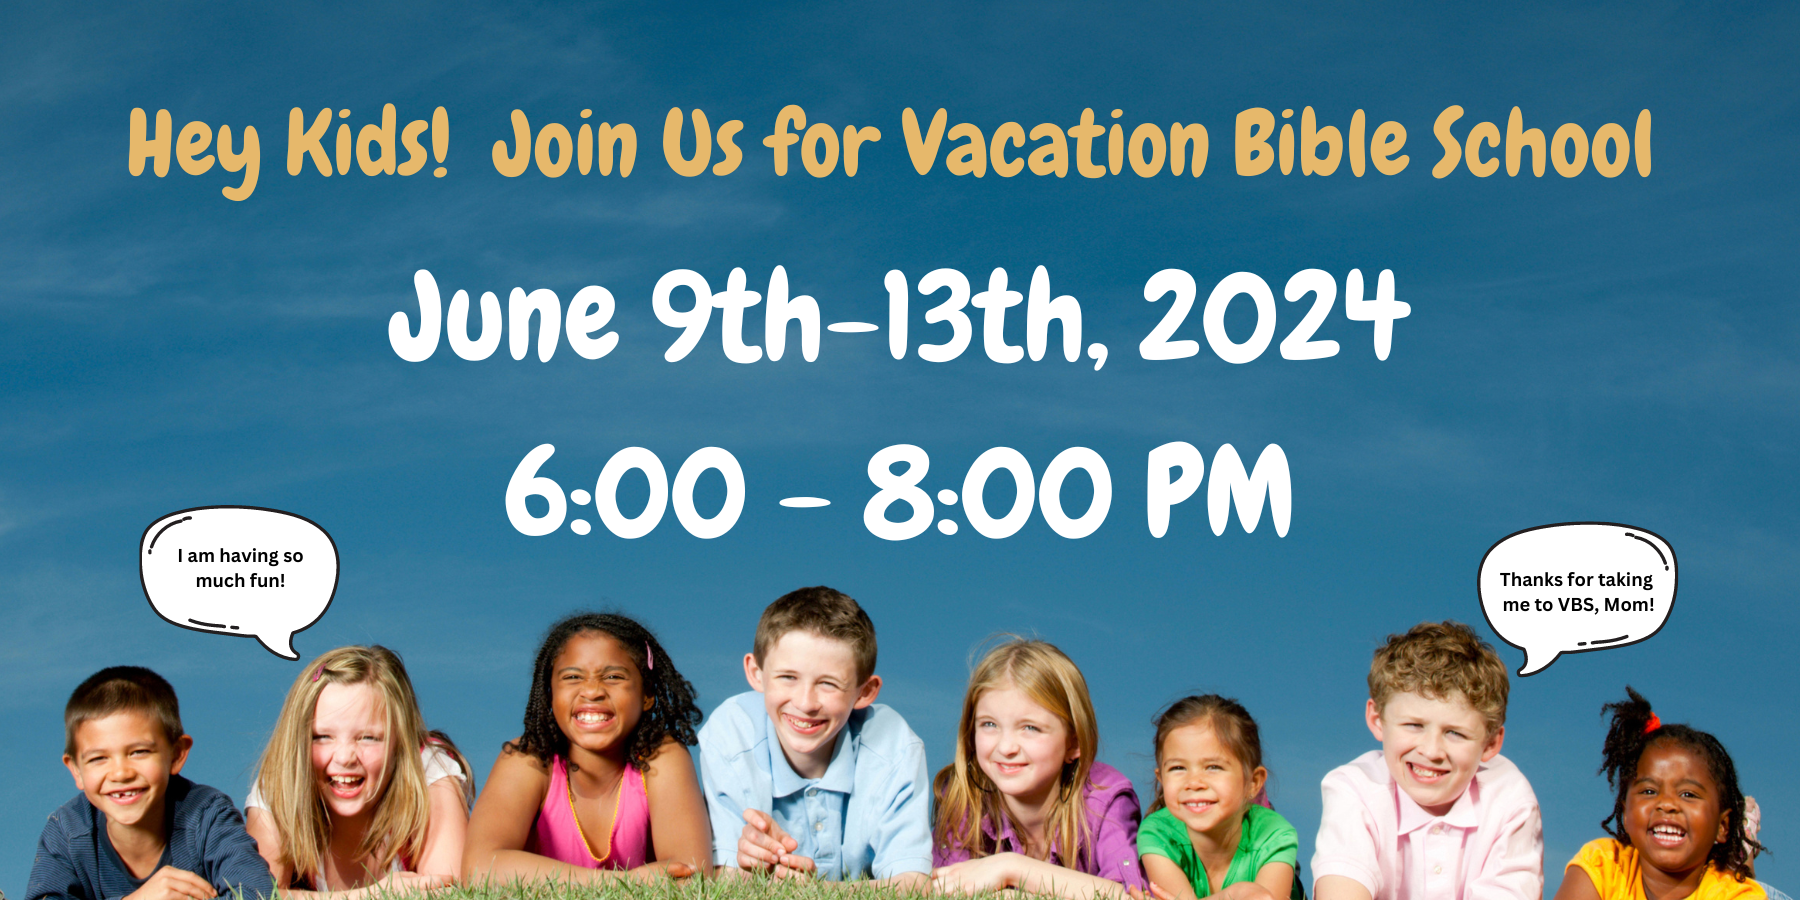 Vacation Bible School June 9th-13th